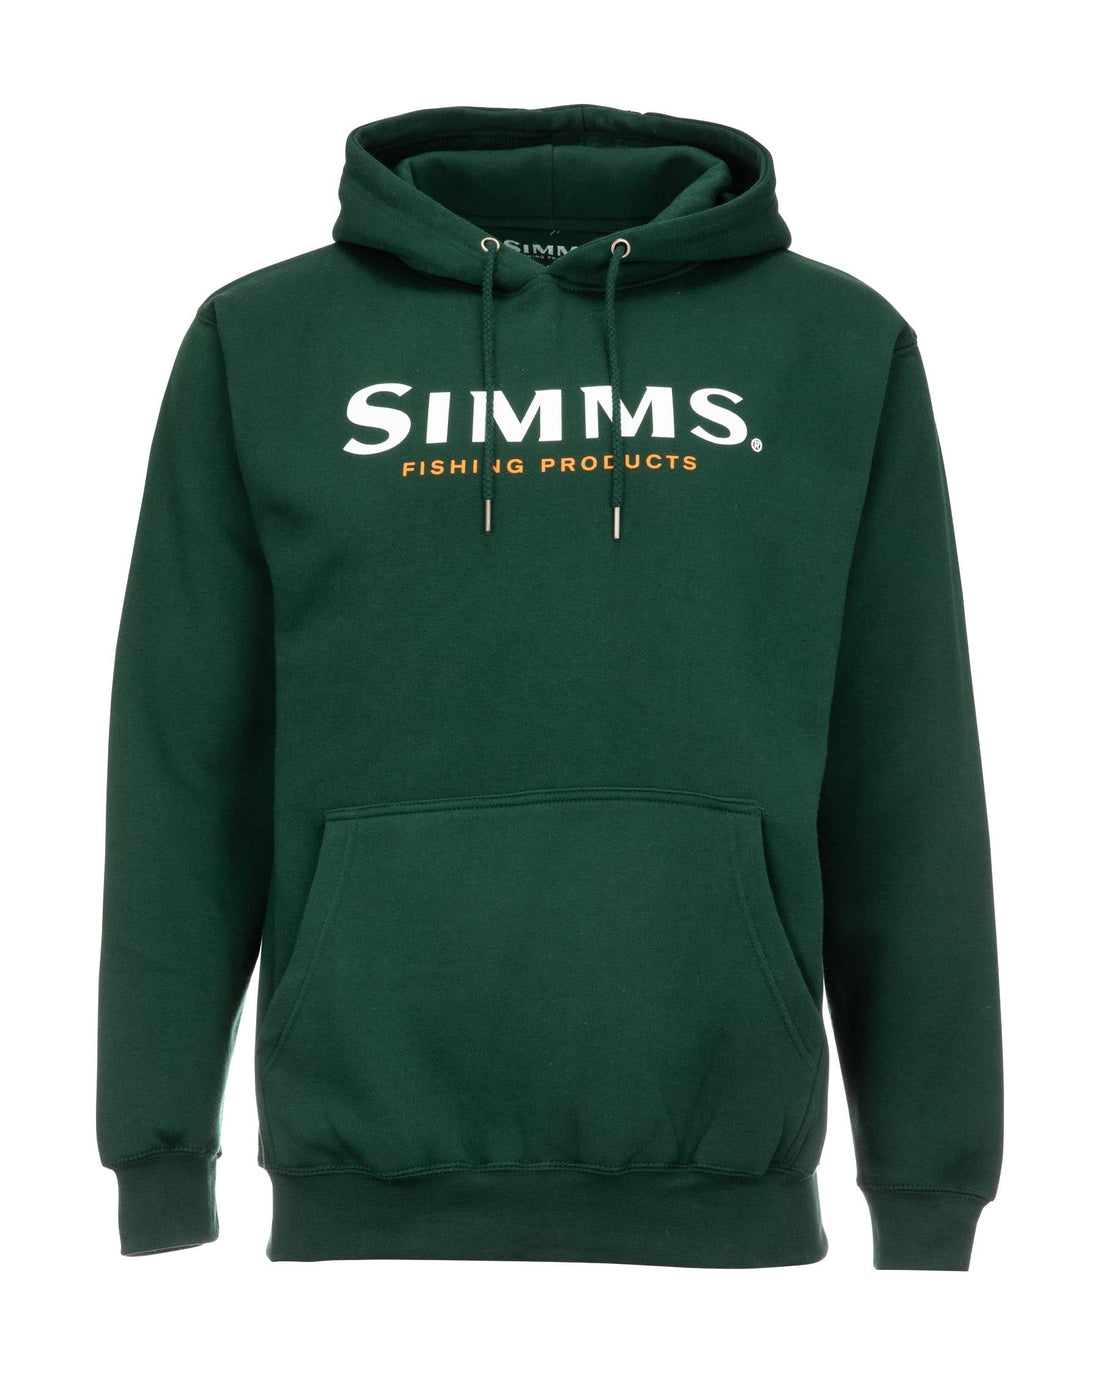 M's Henry's Fork Hoody  Simms Fishing Products